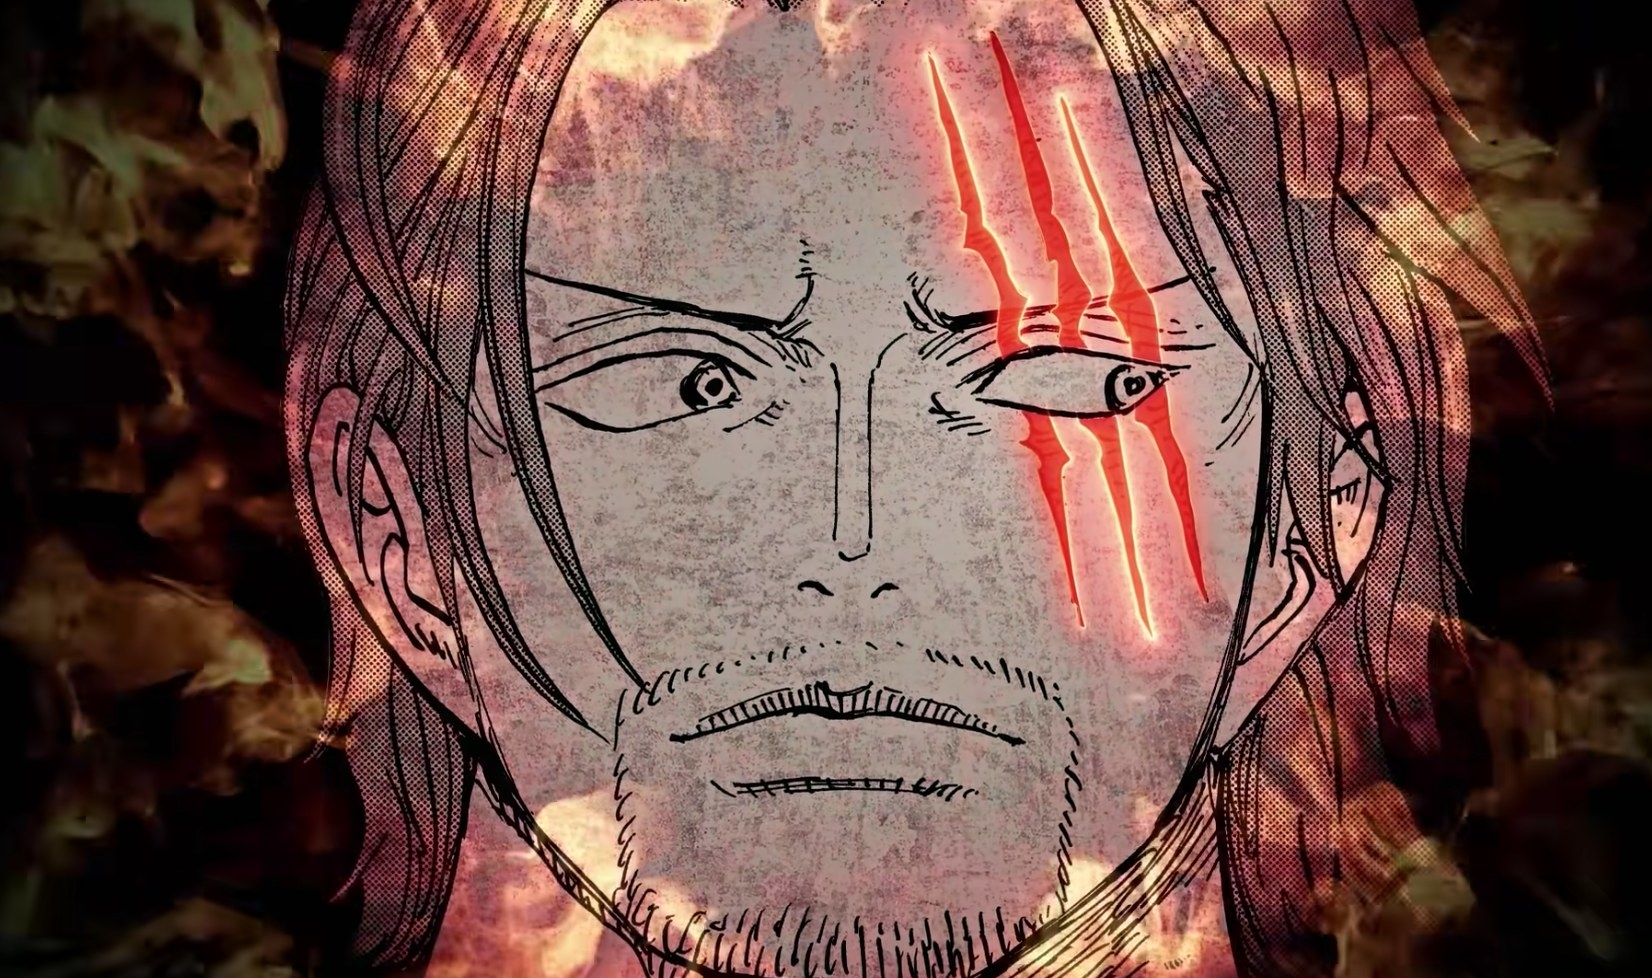 Image of Shanks from One Piece